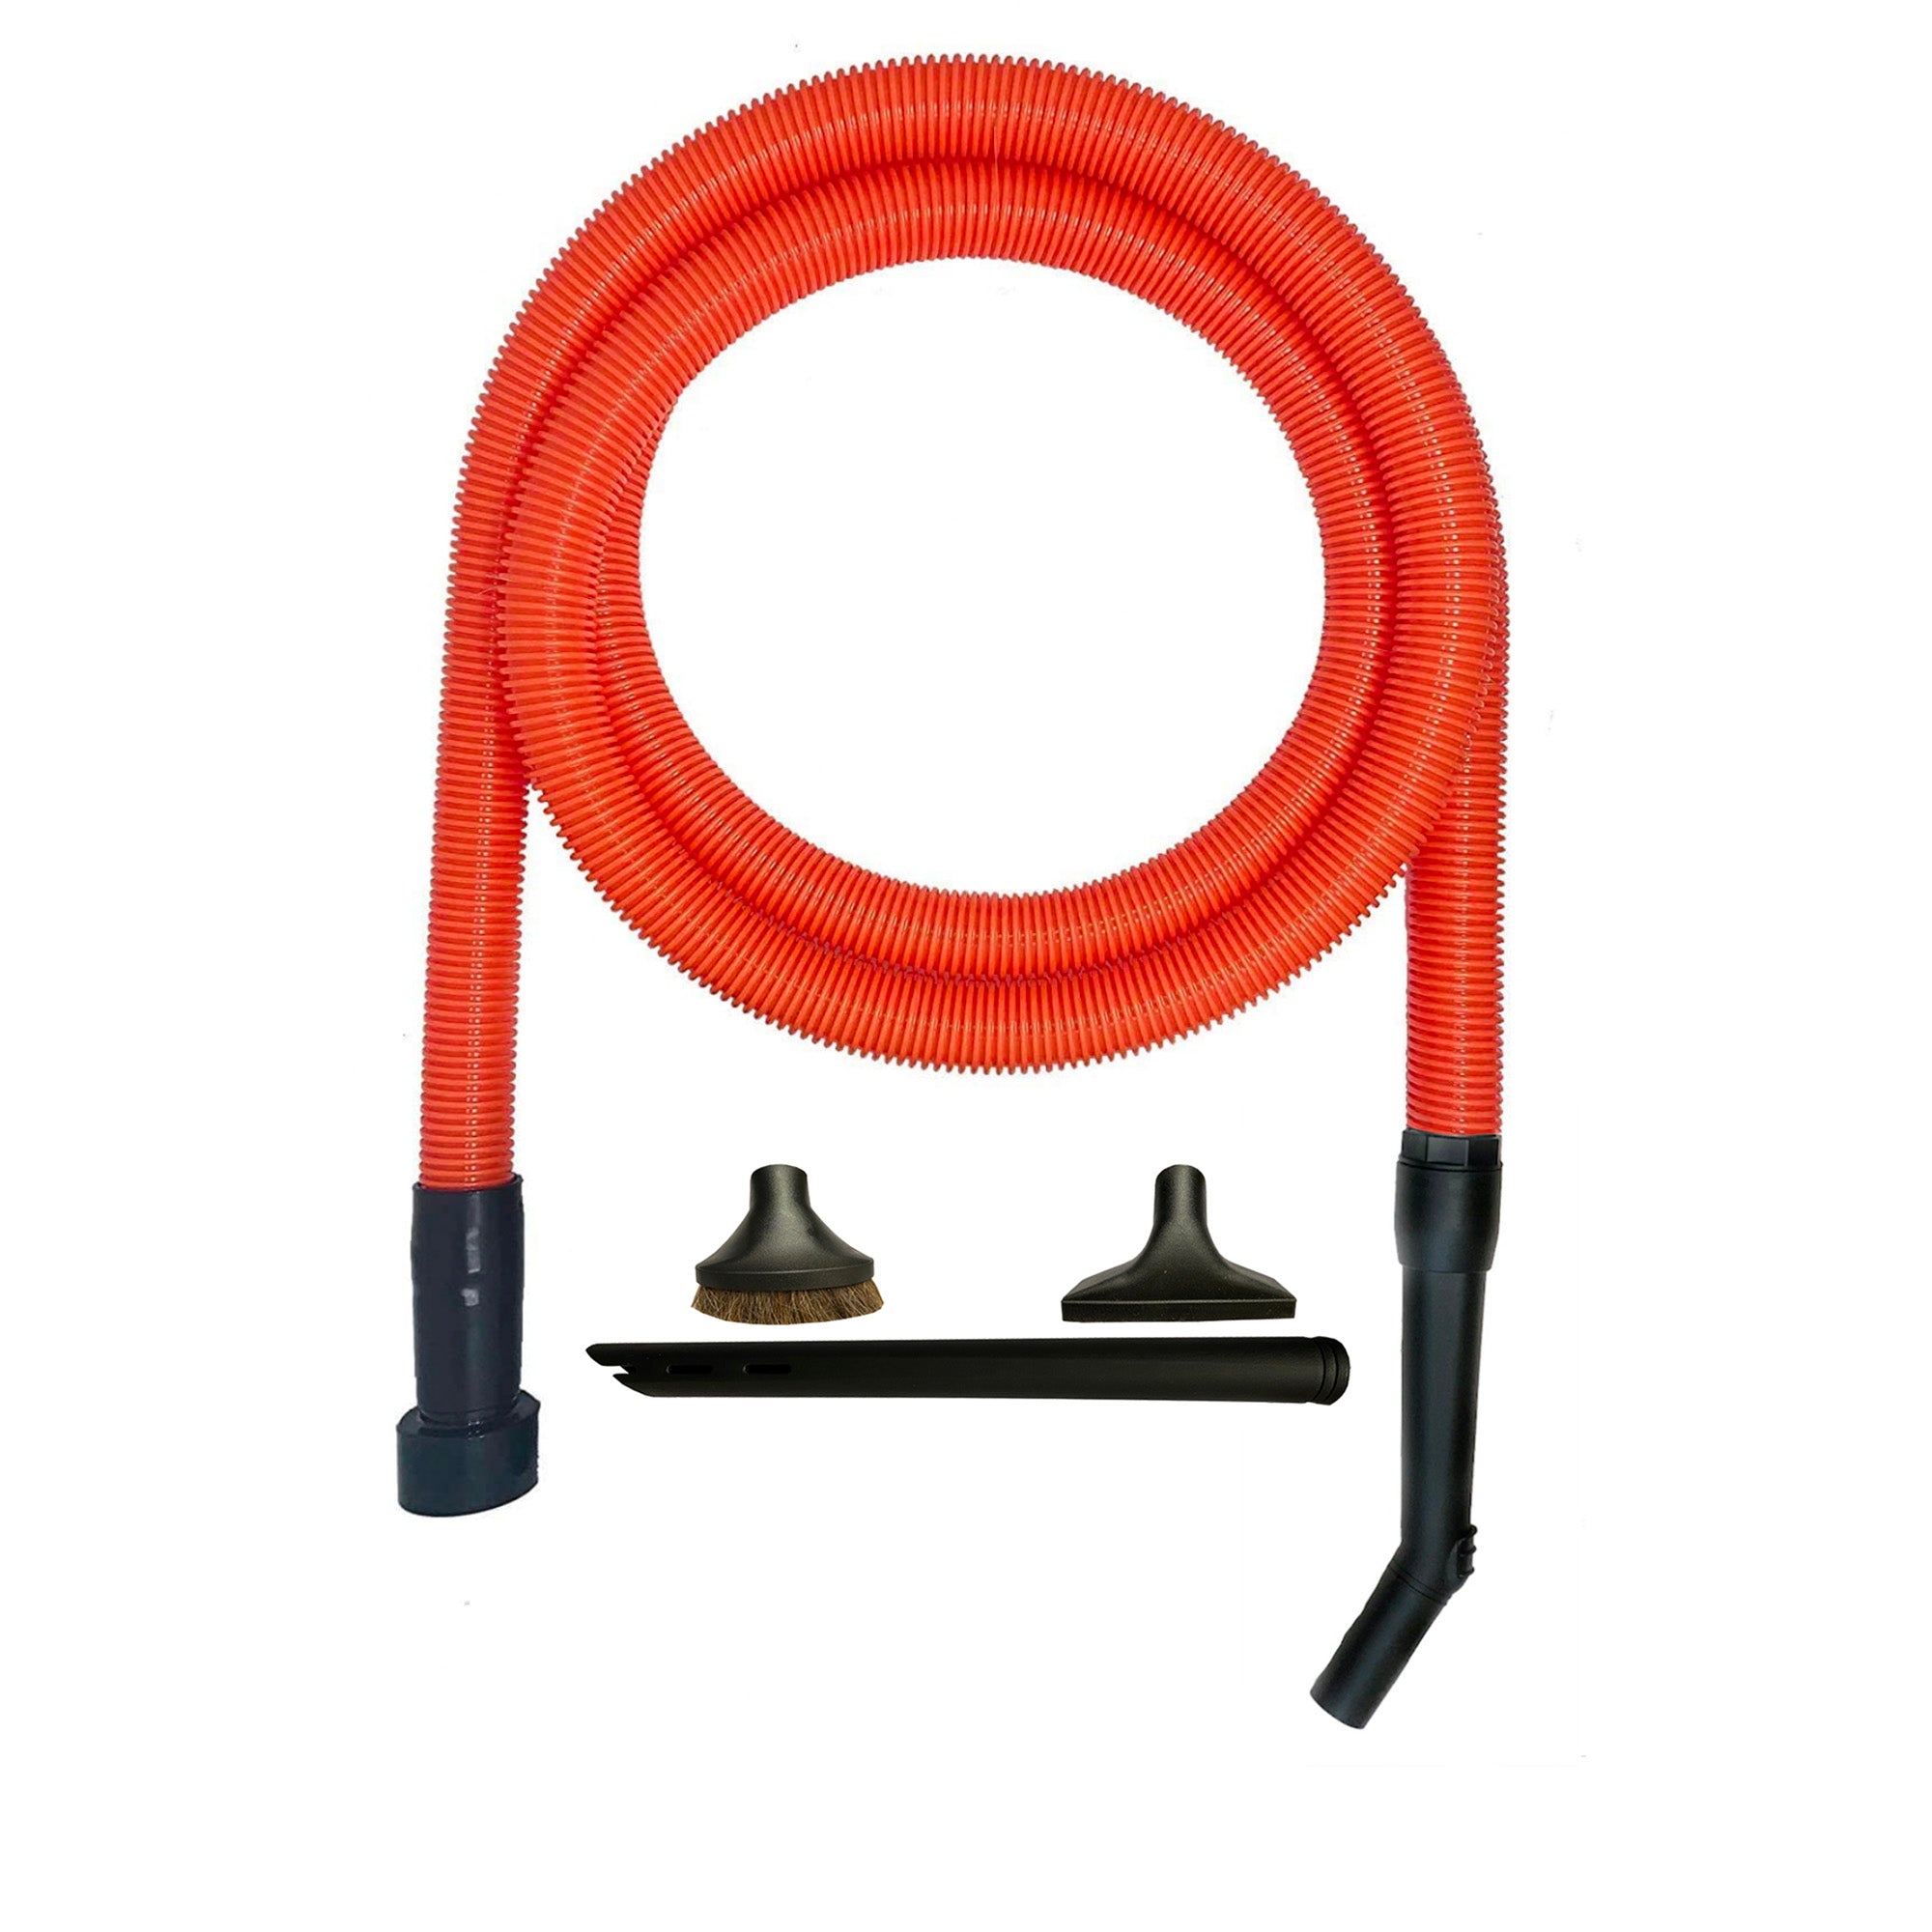 VPC Premium Wet Dry Shop Vacuum Extension Hose with Curved Handle with 3 Piece Deluxe Cleaning Attachments - Orange